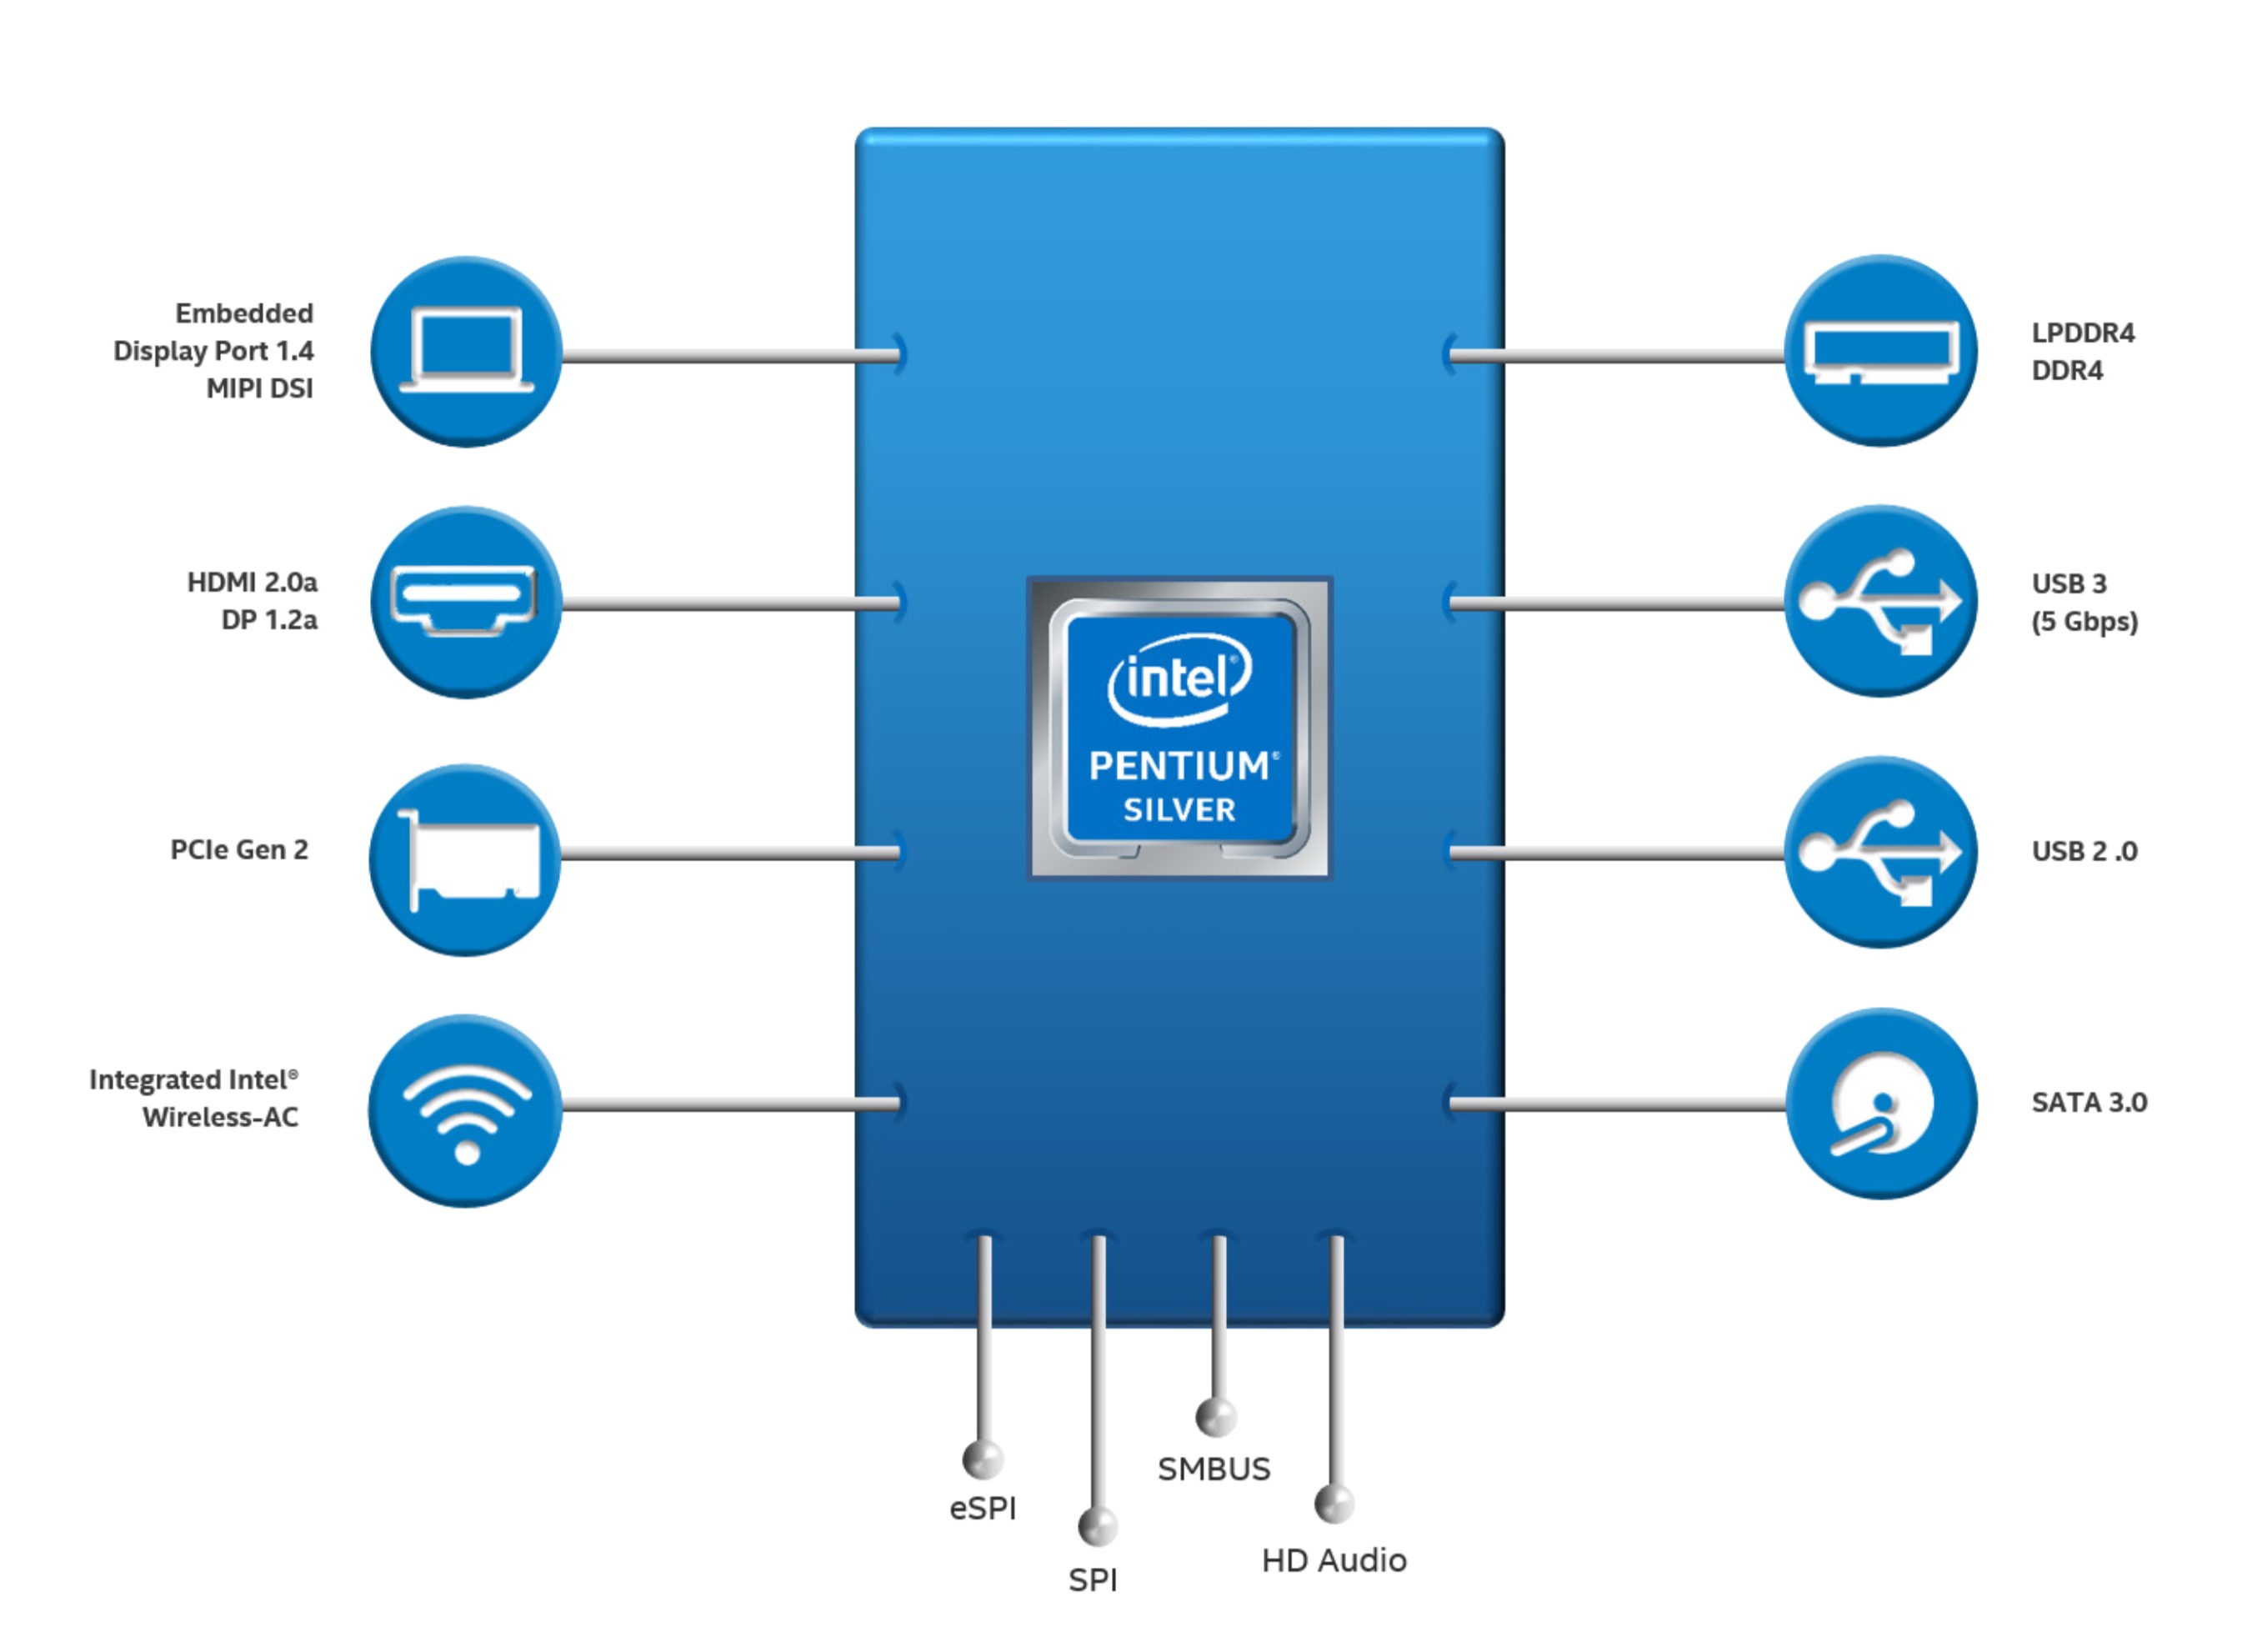 Gemini Lake Refresh - New entry-level CPUs from Intel ...